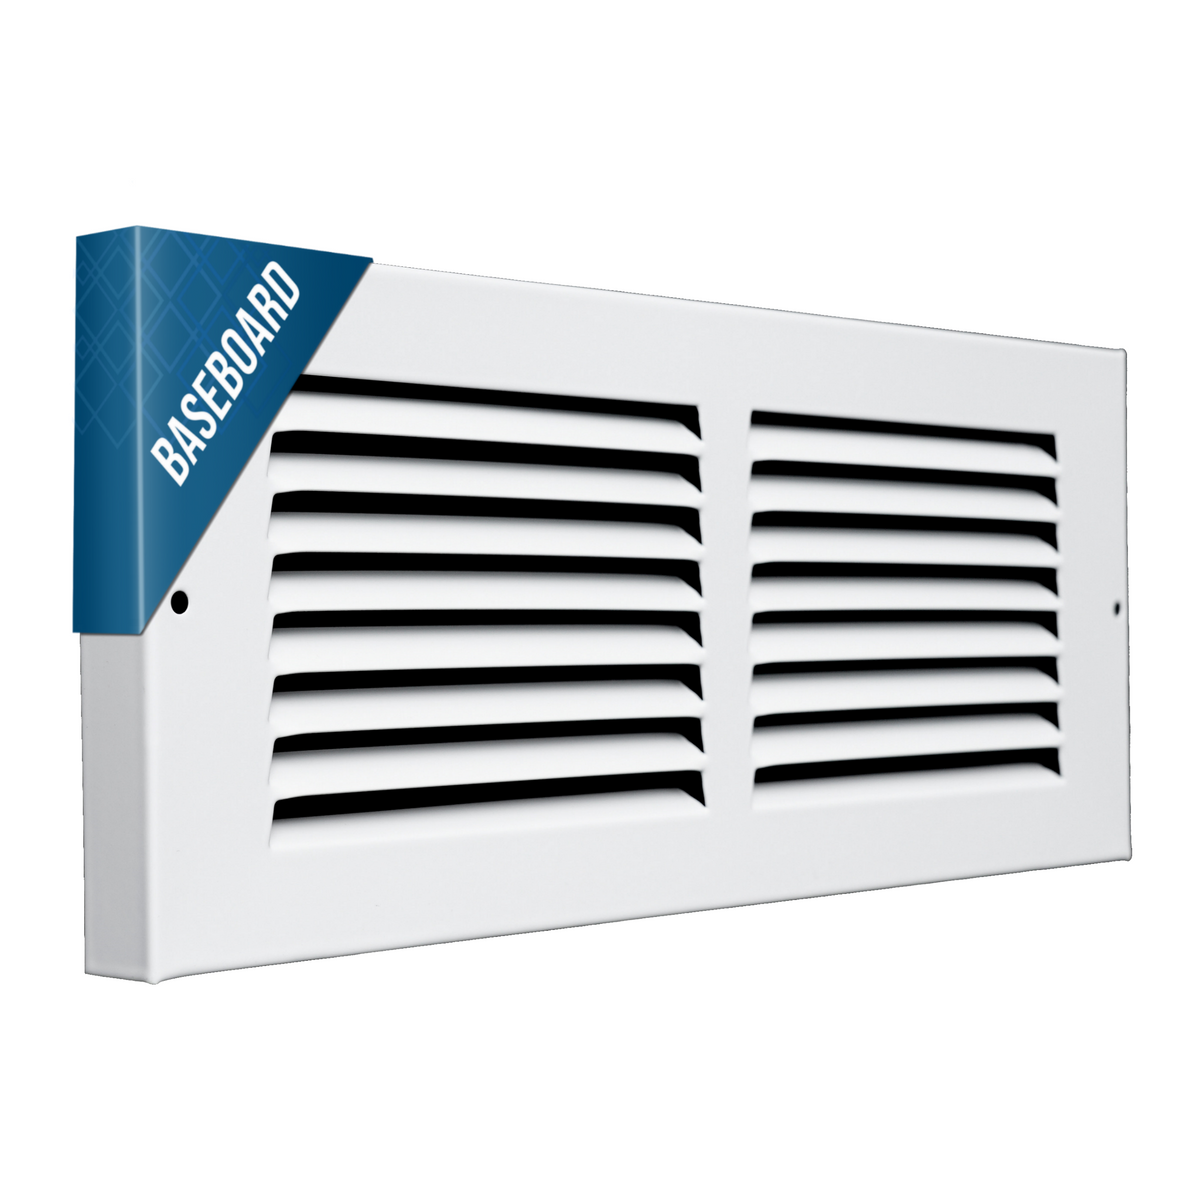 12"W x 4"H [Duct Opening] Baseboard Return Air Grille | 7/8" Margin Turnback to Fit Baseboard | White | Outer Dimensions: 13.75"W X 5.75"H